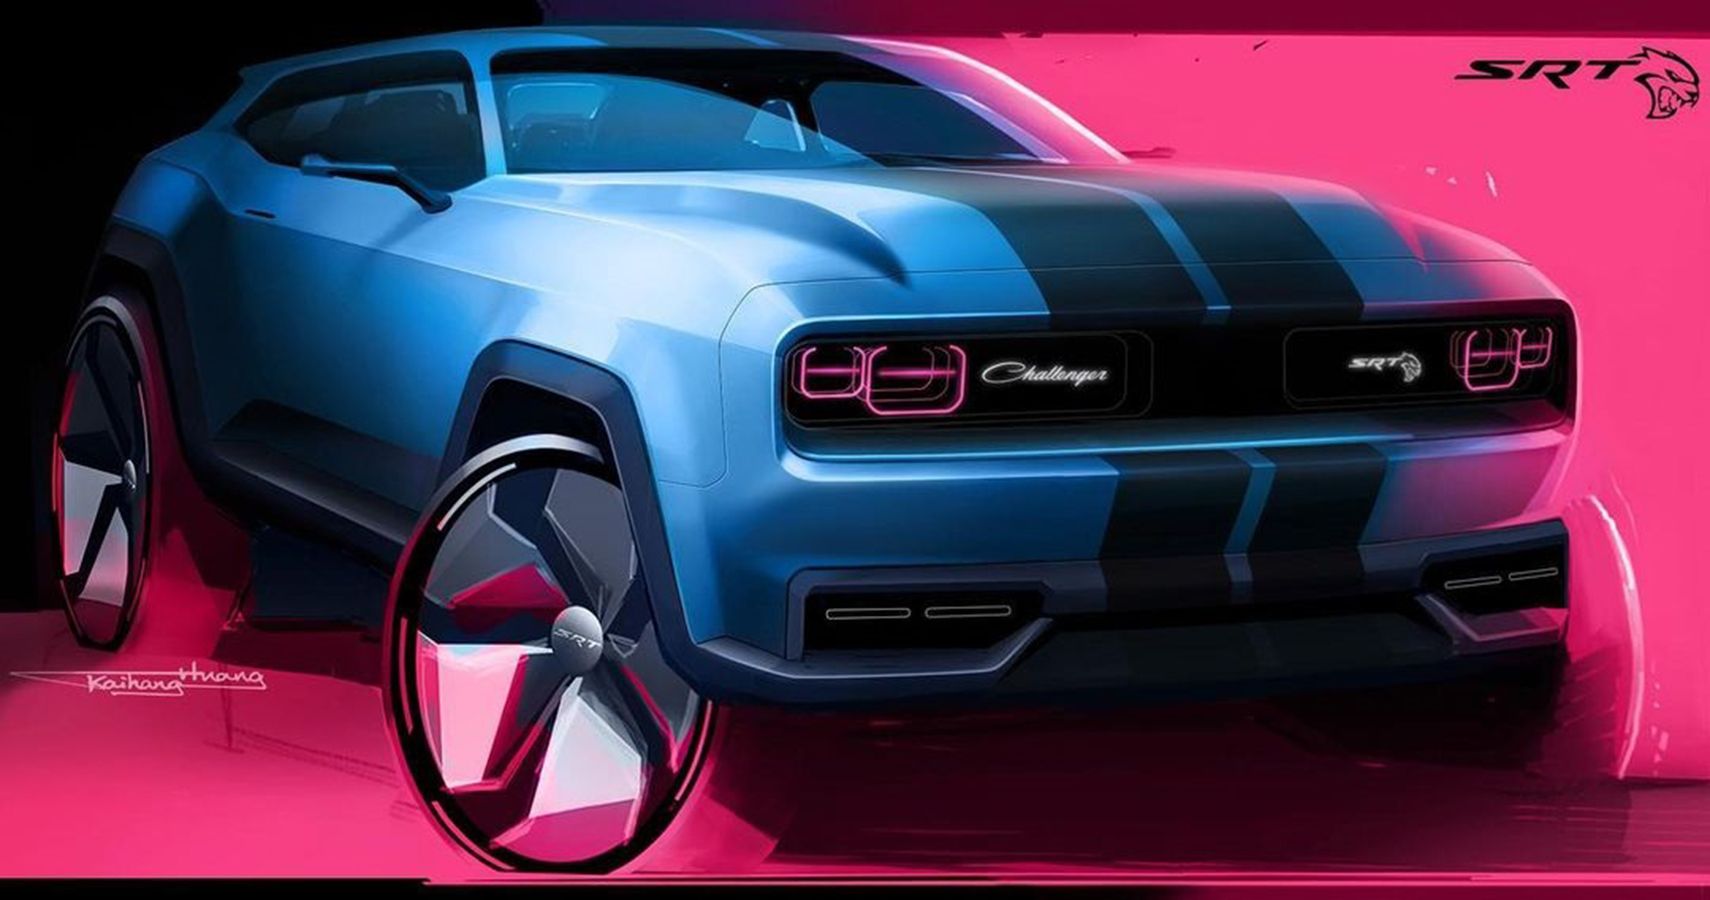 Here's What A Dodge Challenger All-Electric SUV Could Look Like